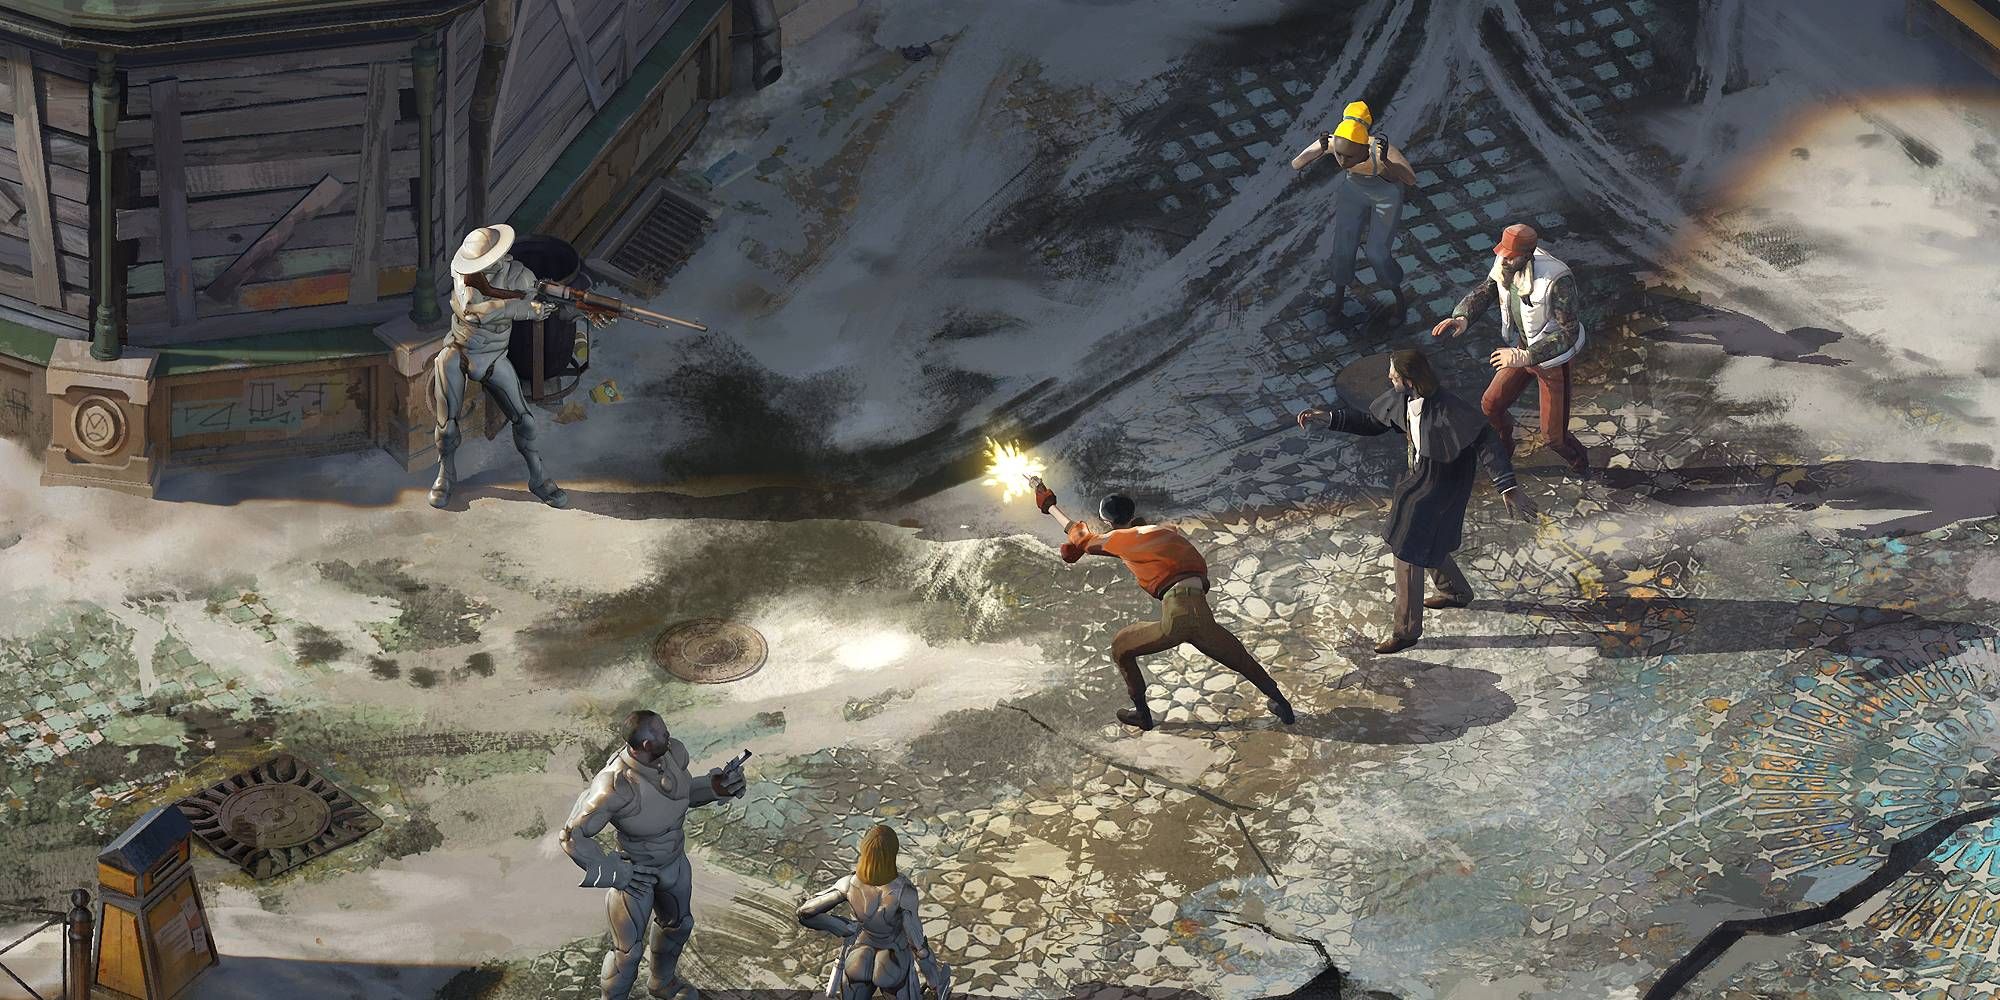 An isometric view of a shootout with numerous figures in Disco Elysium